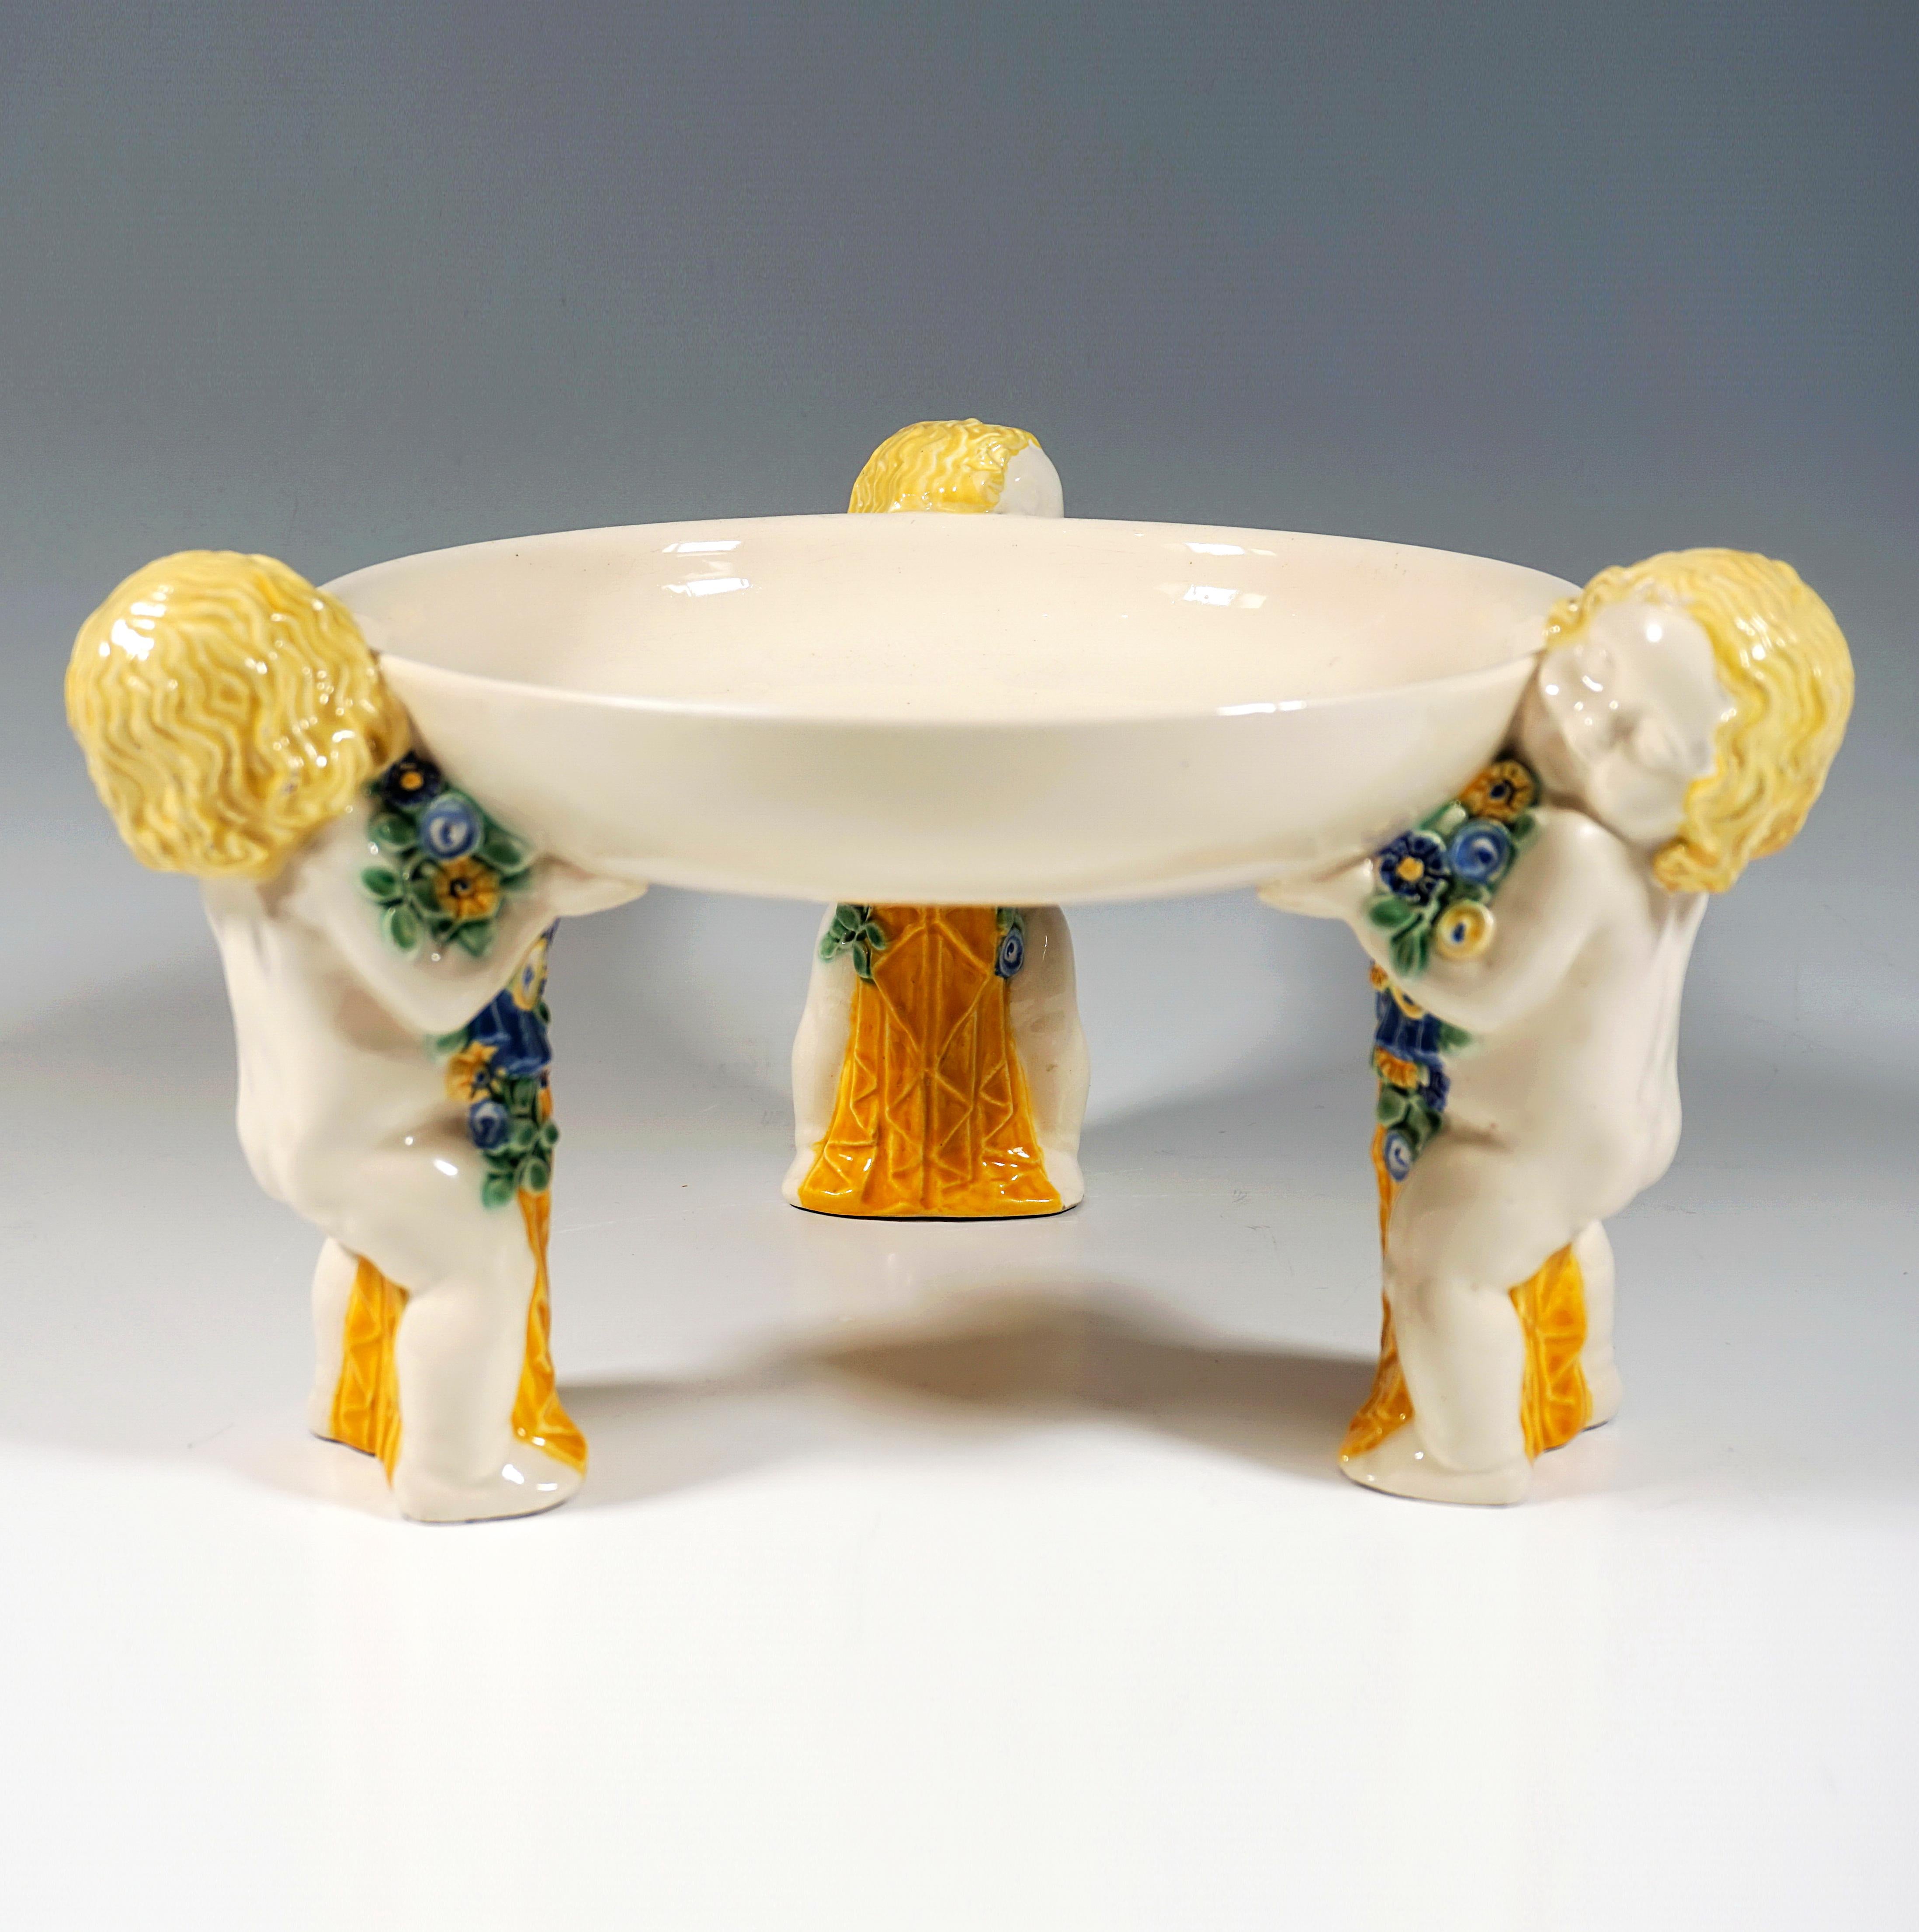 Three standing nude putti with floral decorations and yellow draperies carrying a shallow round bowl. Without base.

By Michael Powolny (1871 - 1954)
Nowadays, art experts attest Michael Powolny’s work as the work of one of the most important